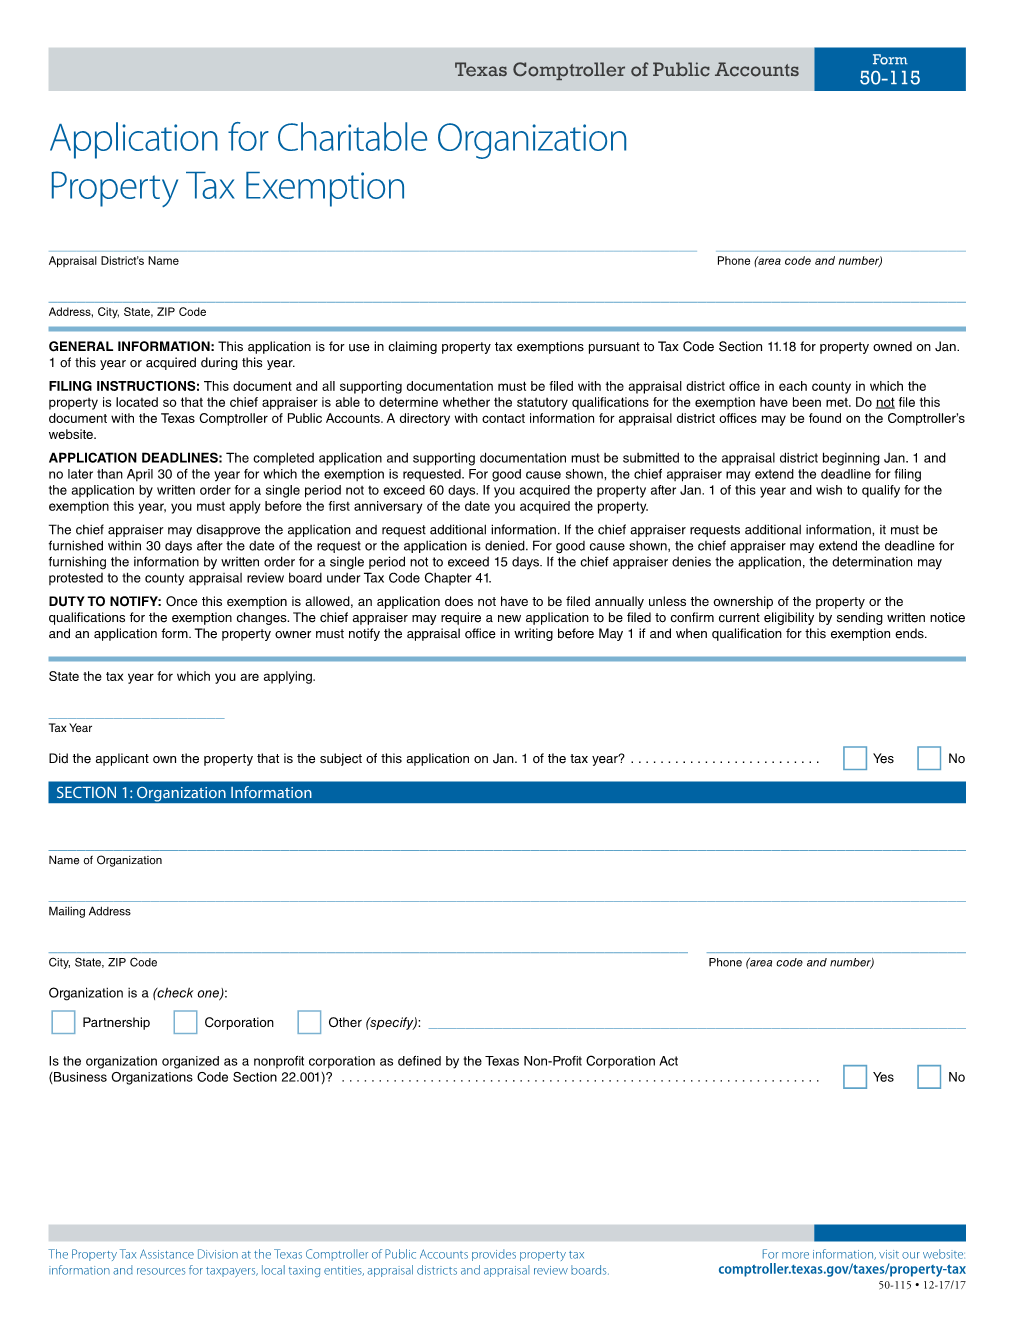 50-115, Application for Charitable Organization Property Tax Exemption